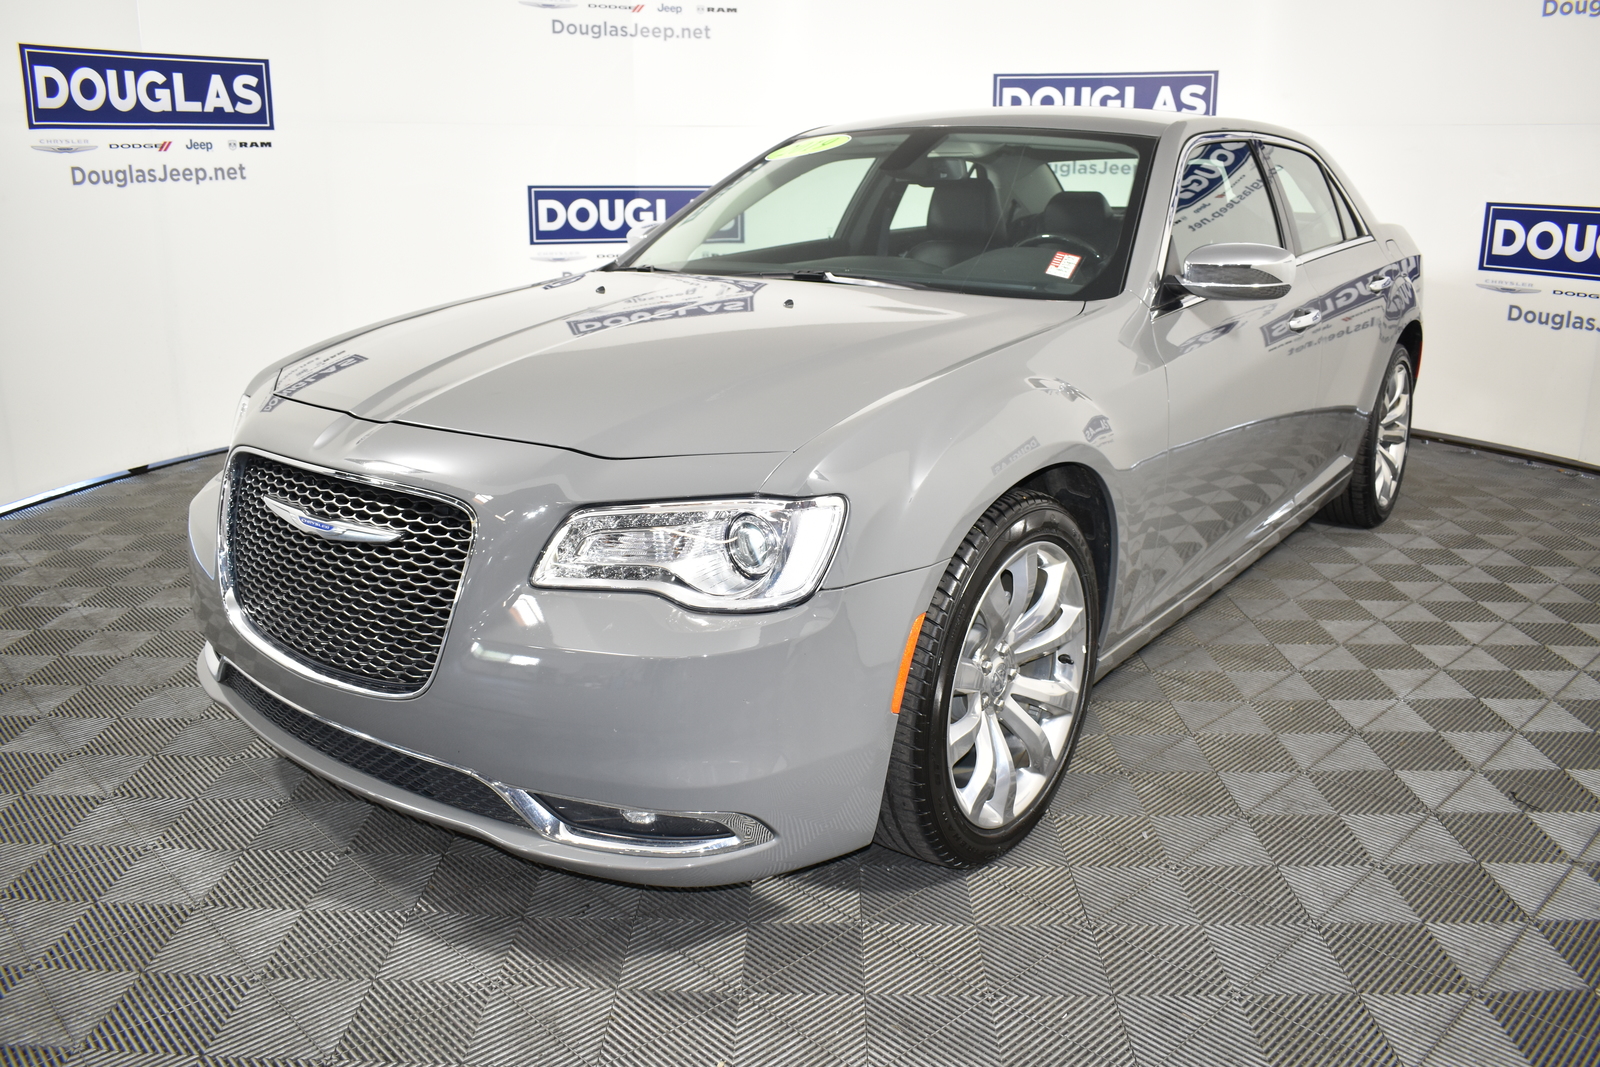 PreOwned 2019 Chrysler 300 Limited RWD 4dr Car in Venice